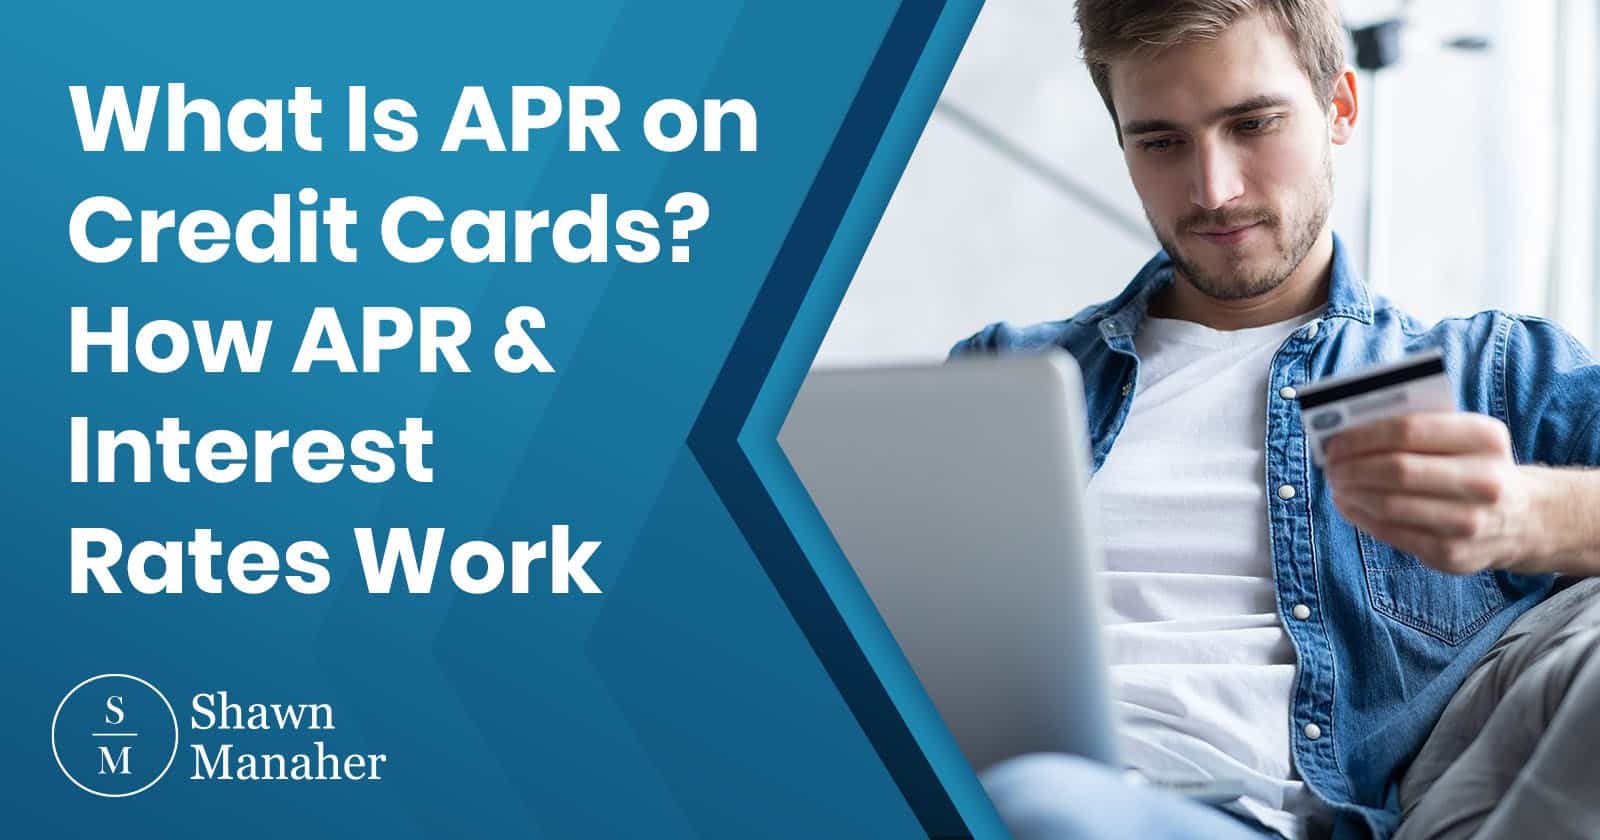 What Is APR On Credit Cards? How APR & Interest Rates Work